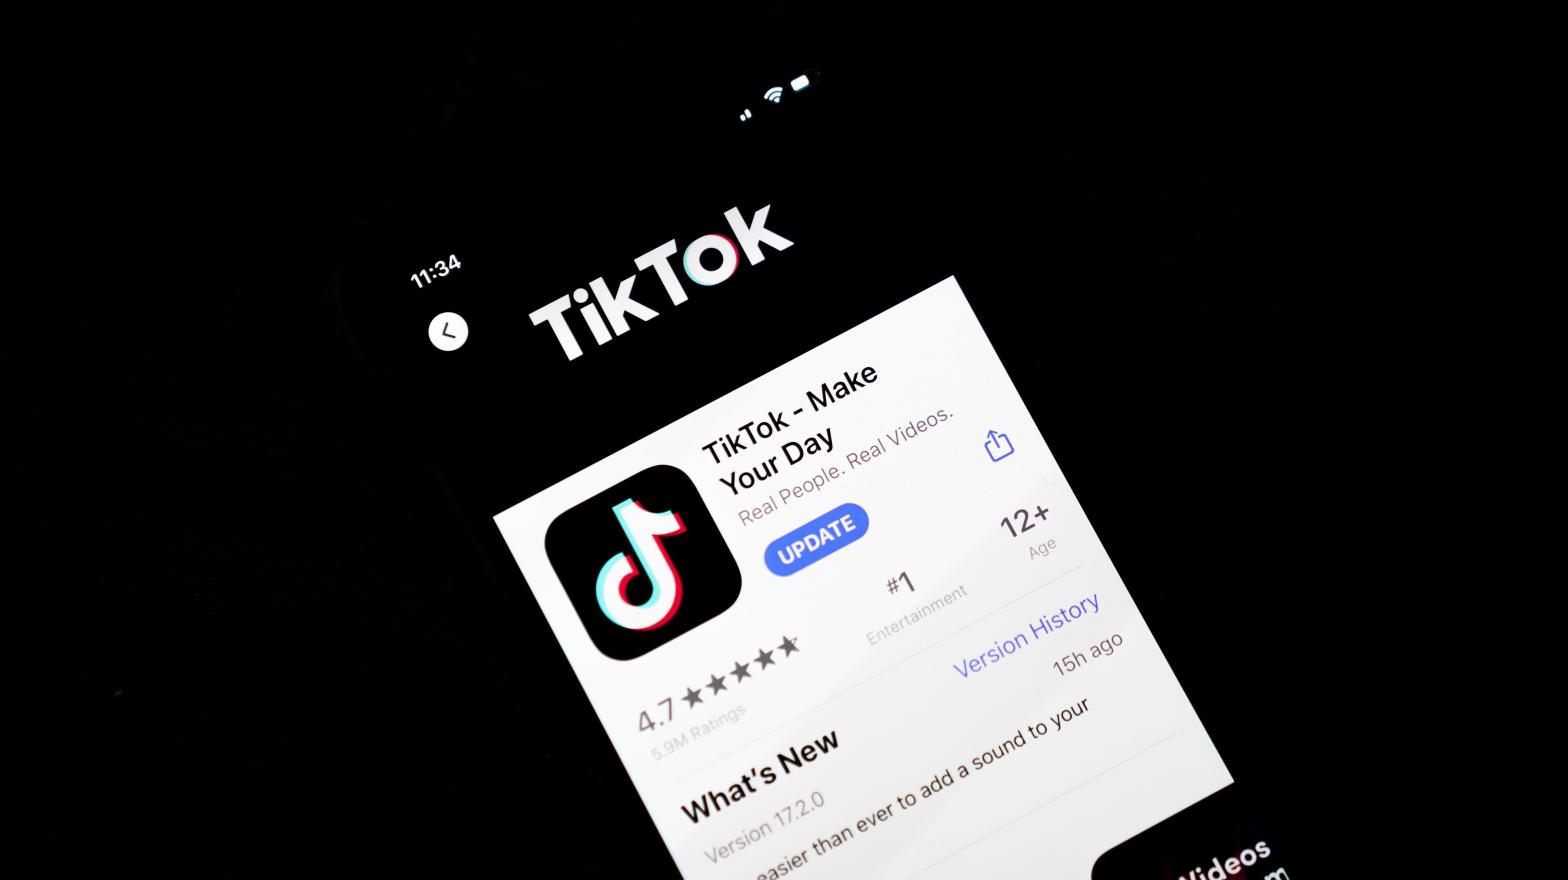 The ByteDance-owned TikTok can't seem to catch a break lately. (Photo: Drew Angerer, Getty Images)